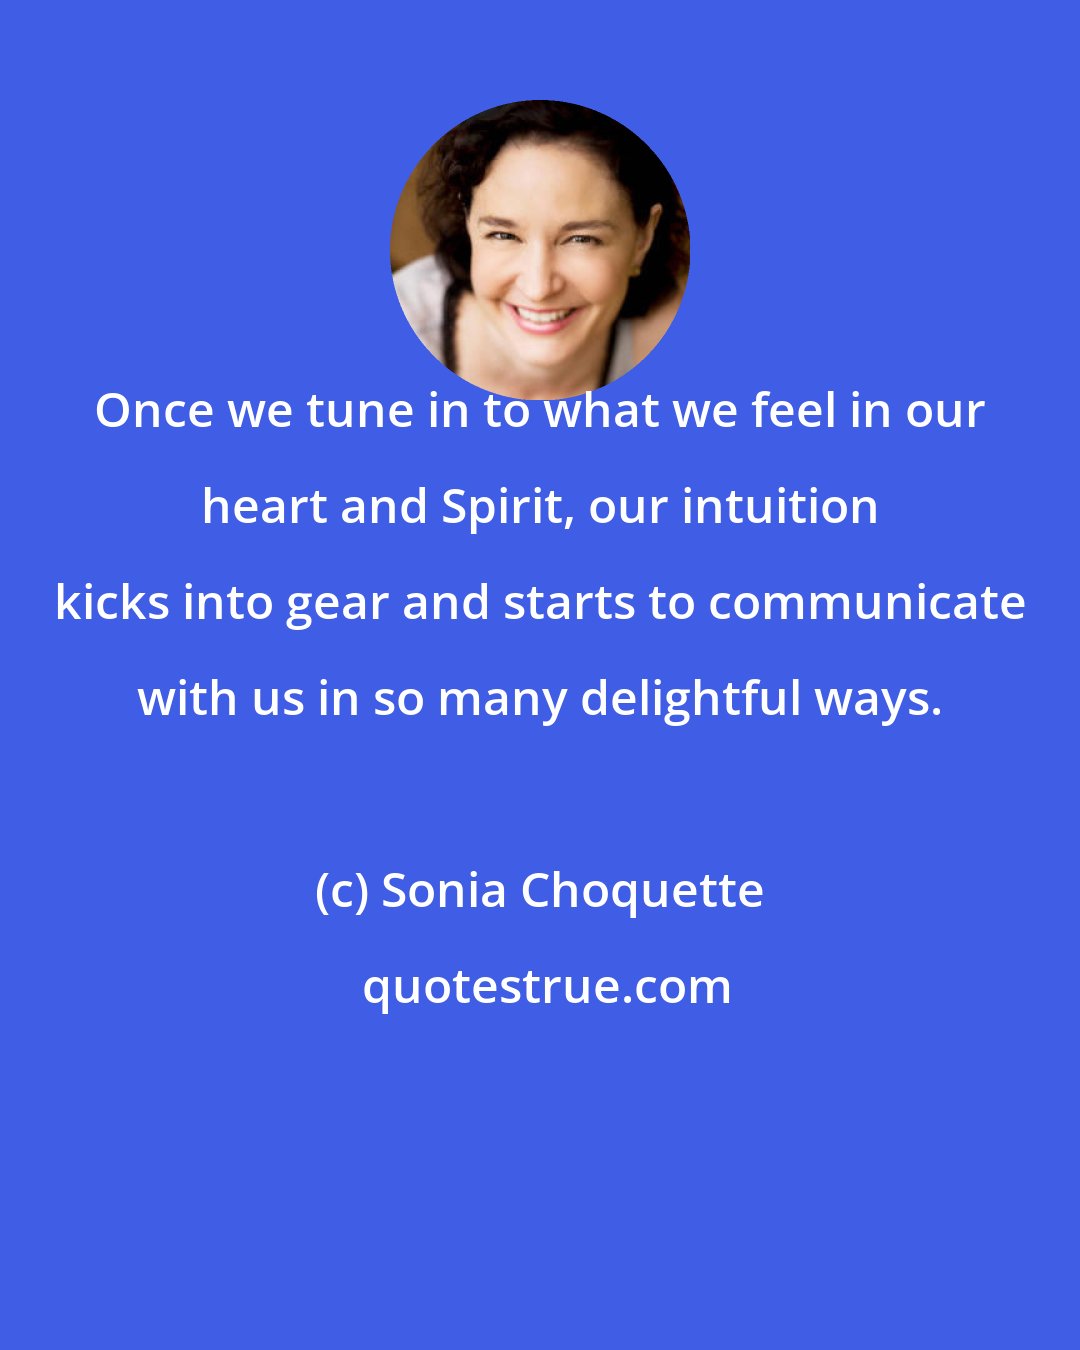 Sonia Choquette: Once we tune in to what we feel in our heart and Spirit, our intuition kicks into gear and starts to communicate with us in so many delightful ways.